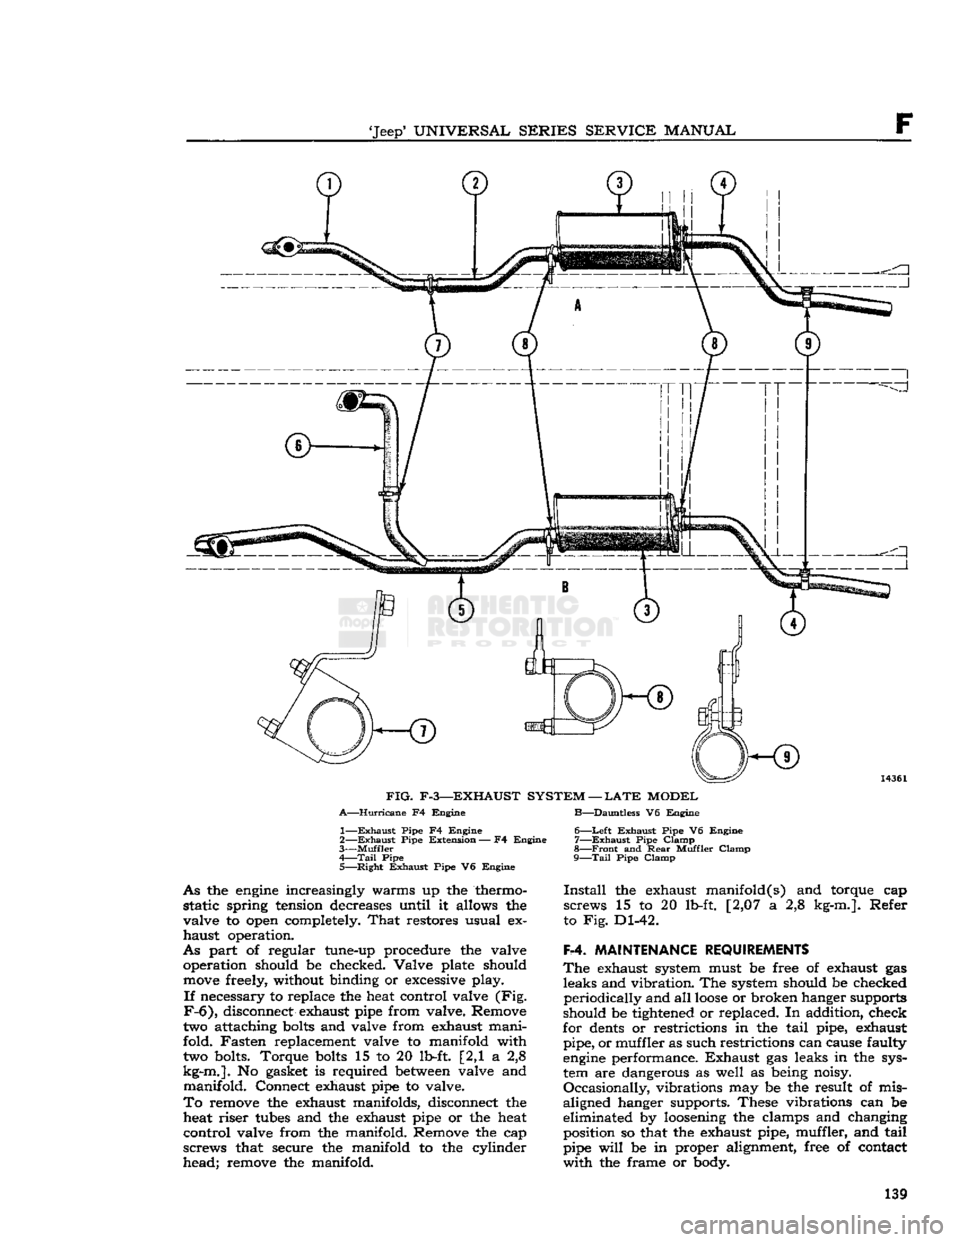 JEEP CJ 1953  Service Manual 
Jeep
 UNIVERSAL
 SERIES
 SERVICE
 MANUAL 

© 

1 

1 

©-
 IT 

T" 

I 

FIG.
 F-3—EXHAUST SYSTEM —
 LATE
 MODEL 

A—Hurricane
 F4 Engine B—Dauntless V6 Engine 
1—
 Exhaust
 Pipe F4 Eng